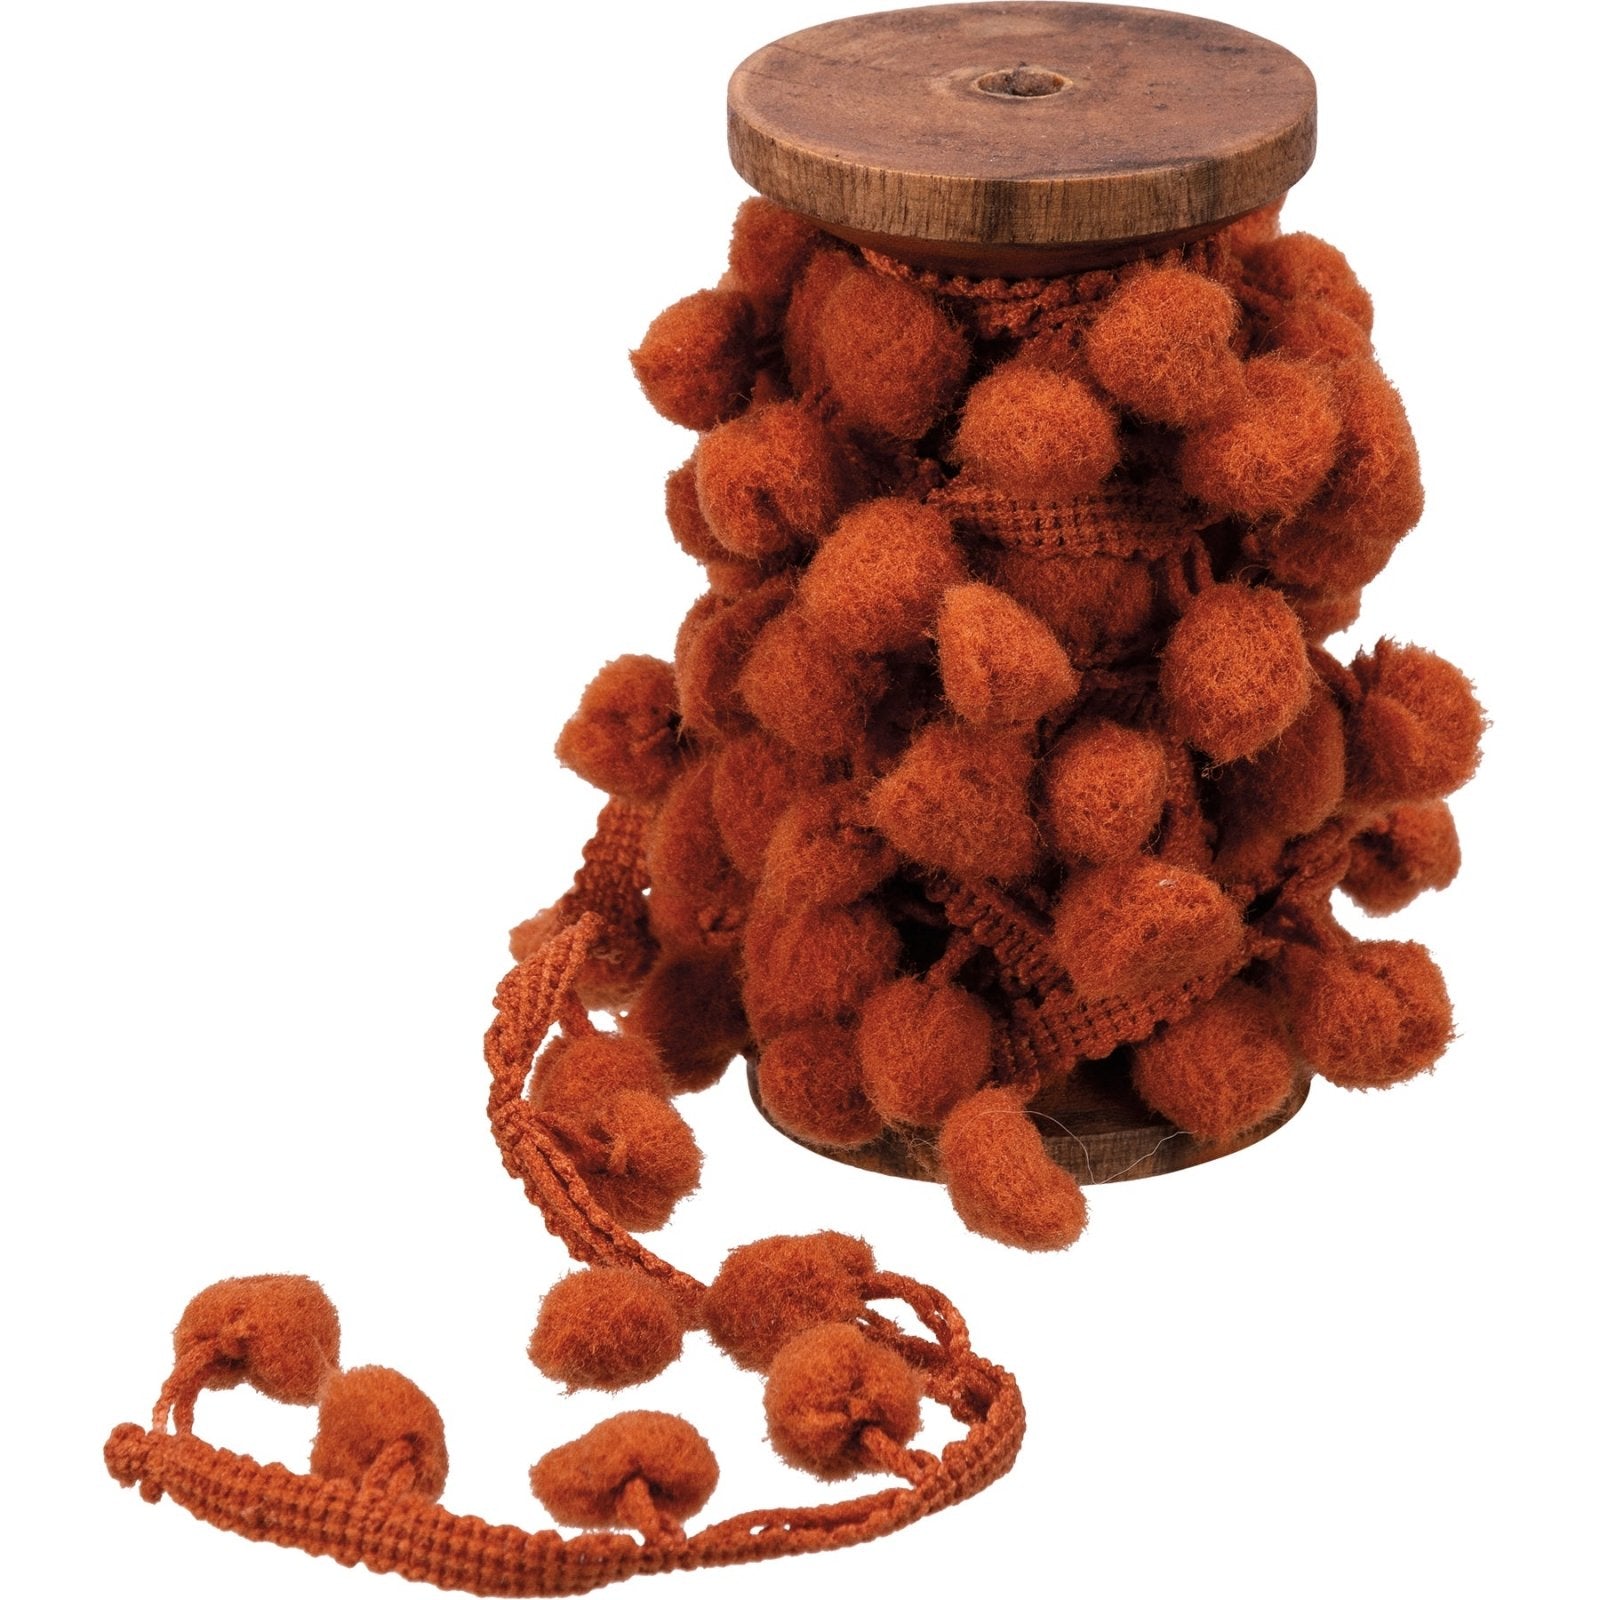 Primitive Wood Spool w/ Rust Pom Pom Garland 108”Long - The Primitive Pineapple Collection